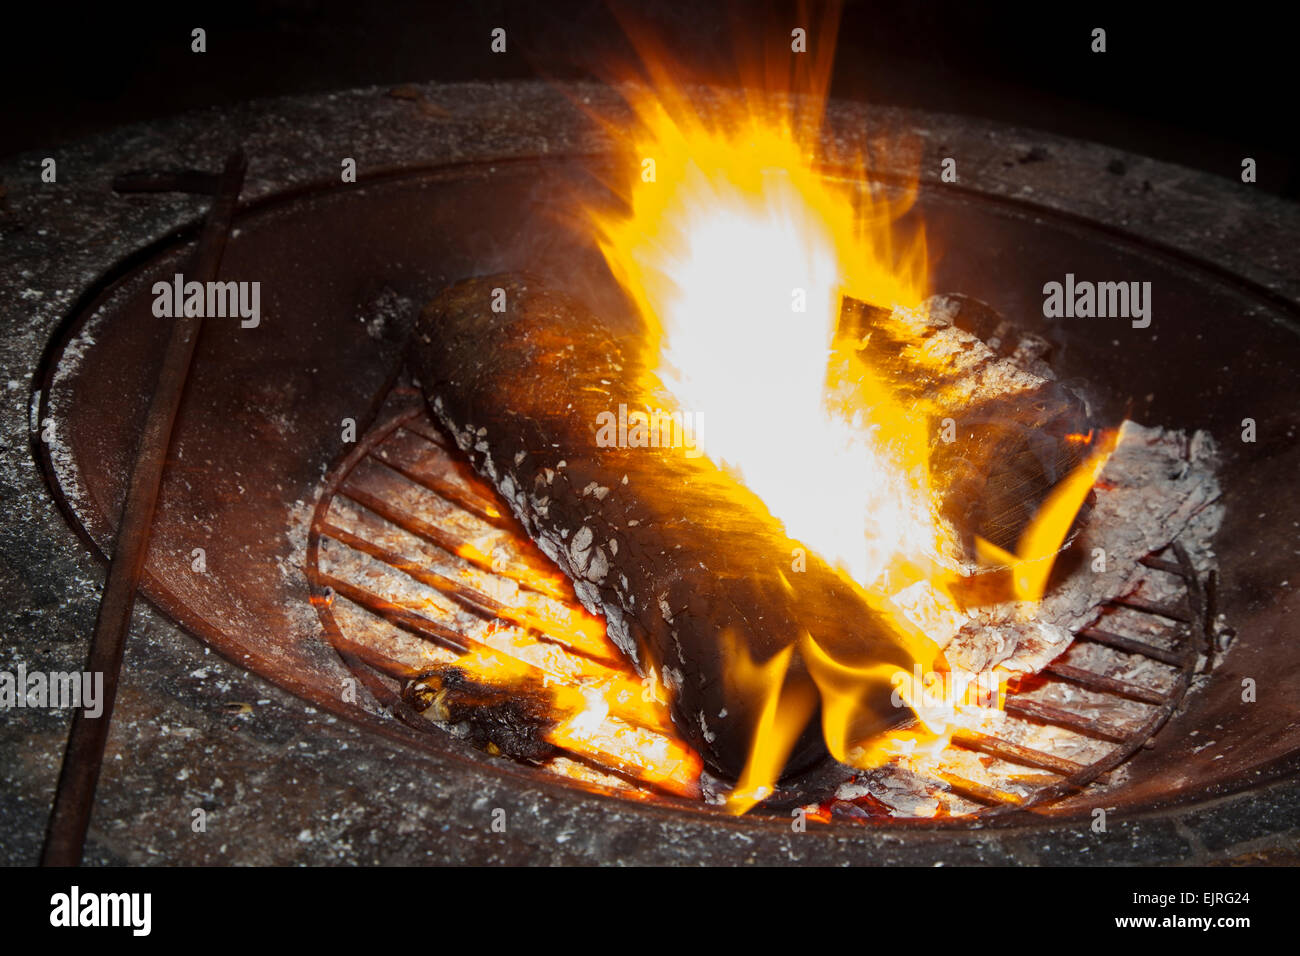 A fire glows brightly in a firepit with a poker resting on the side.  Ash and embers are visible. Stock Photo